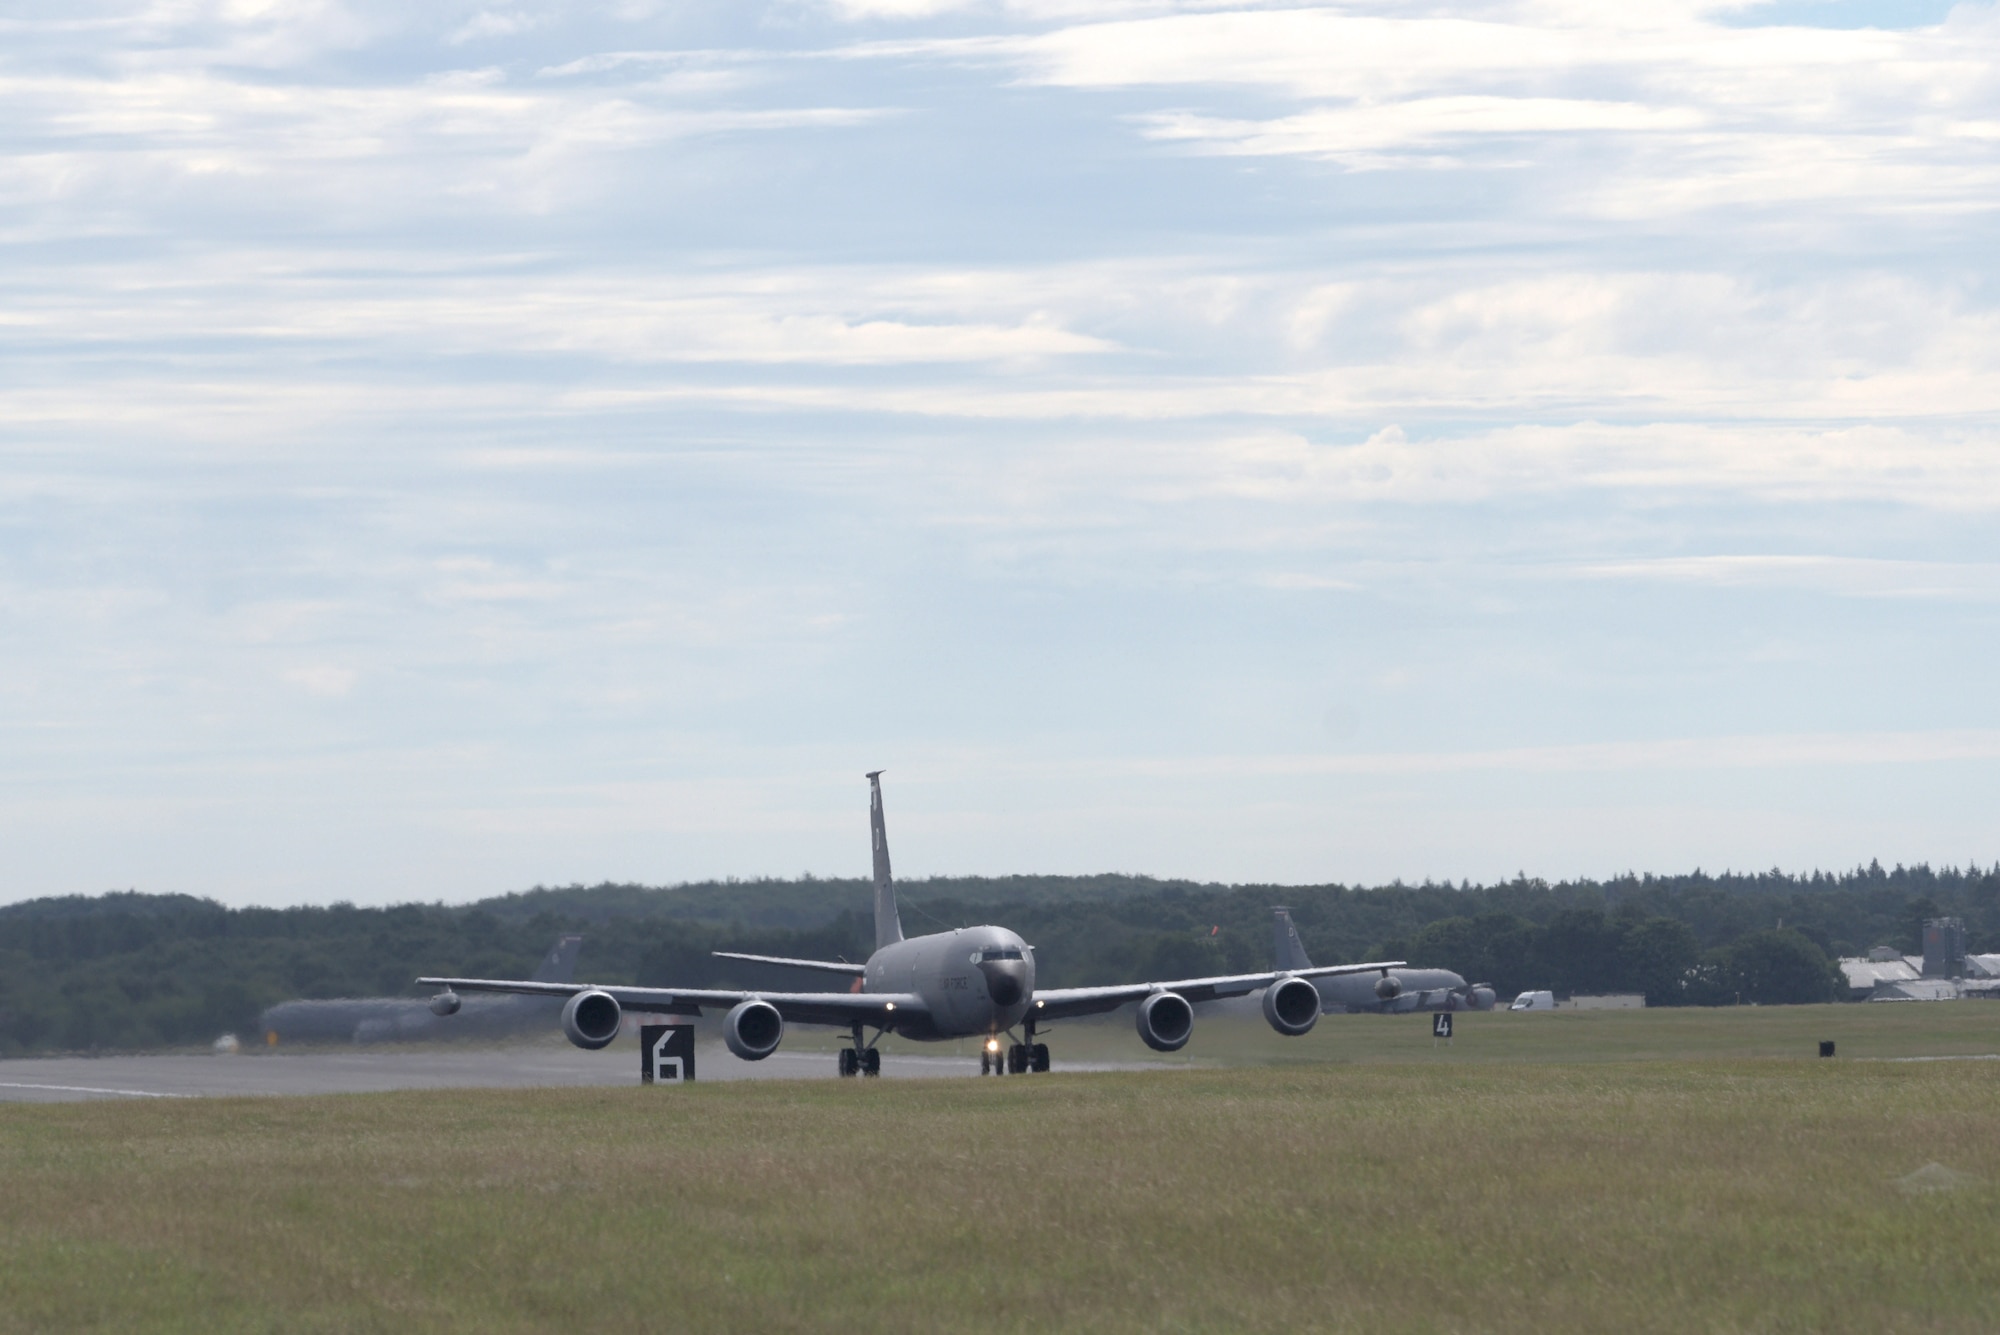 A U.S. Air Force KC-135 Stratotanker, assigned to the 100th Air Refueling Wing, taxis across the runway for takeoff at RAF Mildenahall, July 23, 2020. The 100th ARW is the only permanent U.S. air refueling wing in the European theater, providing the critical air refueling "bridge" which allows the Expeditionary Air Force to deploy around the globe at a moment's notice. (U.S. Air Force photo by Senior Airman Benjamin Cooper)